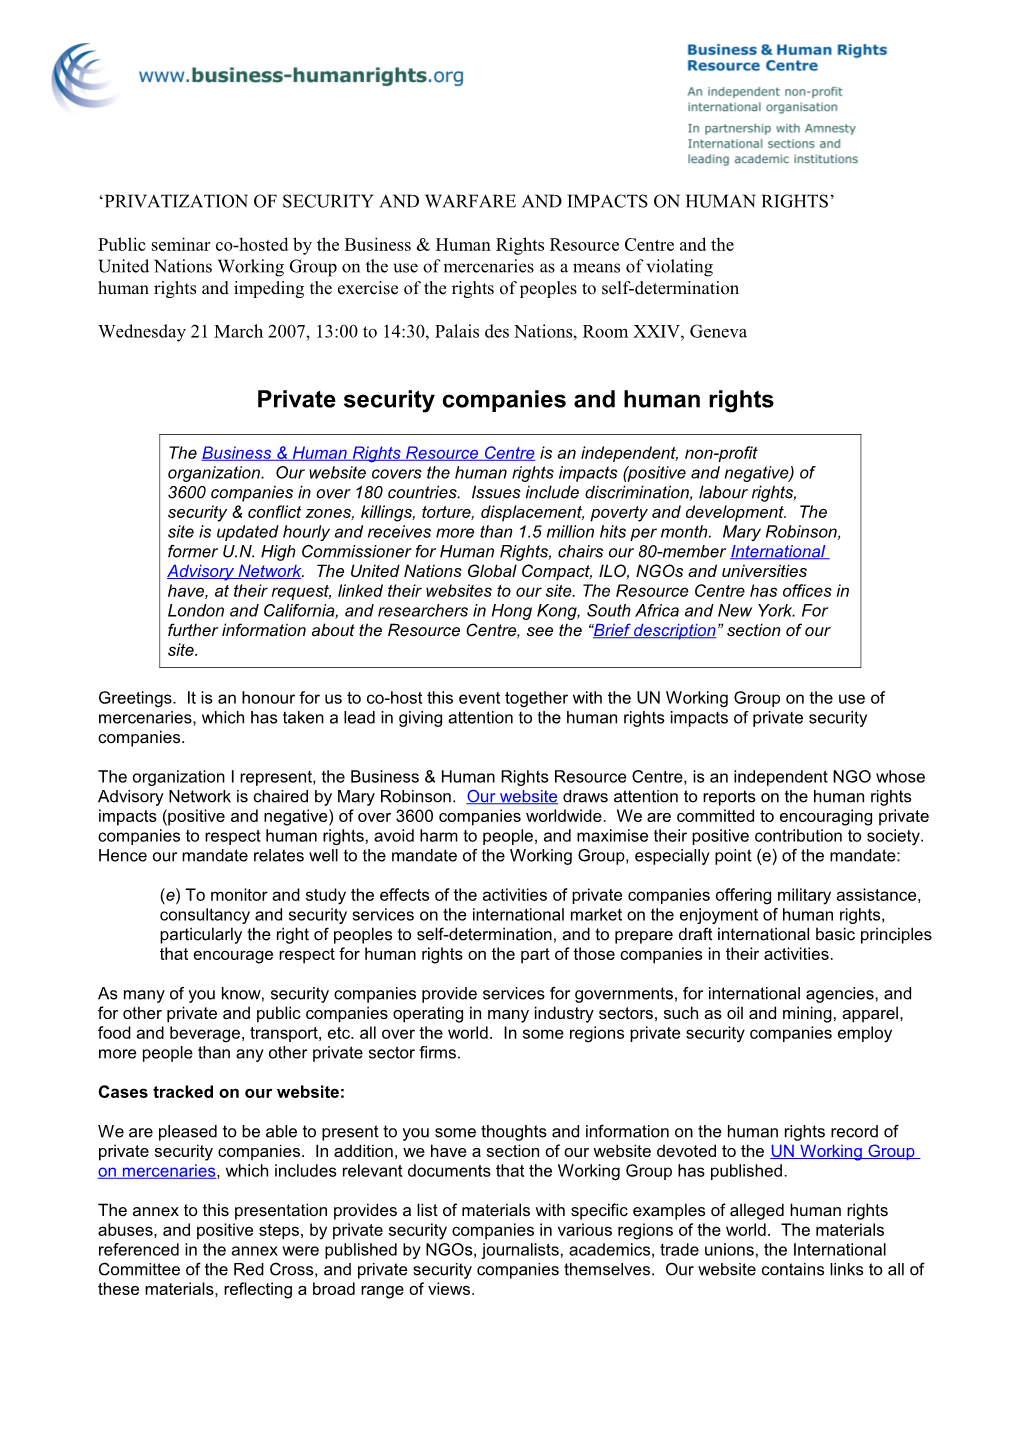 Privatization of Security and Warfare and Impacts on Human Rights